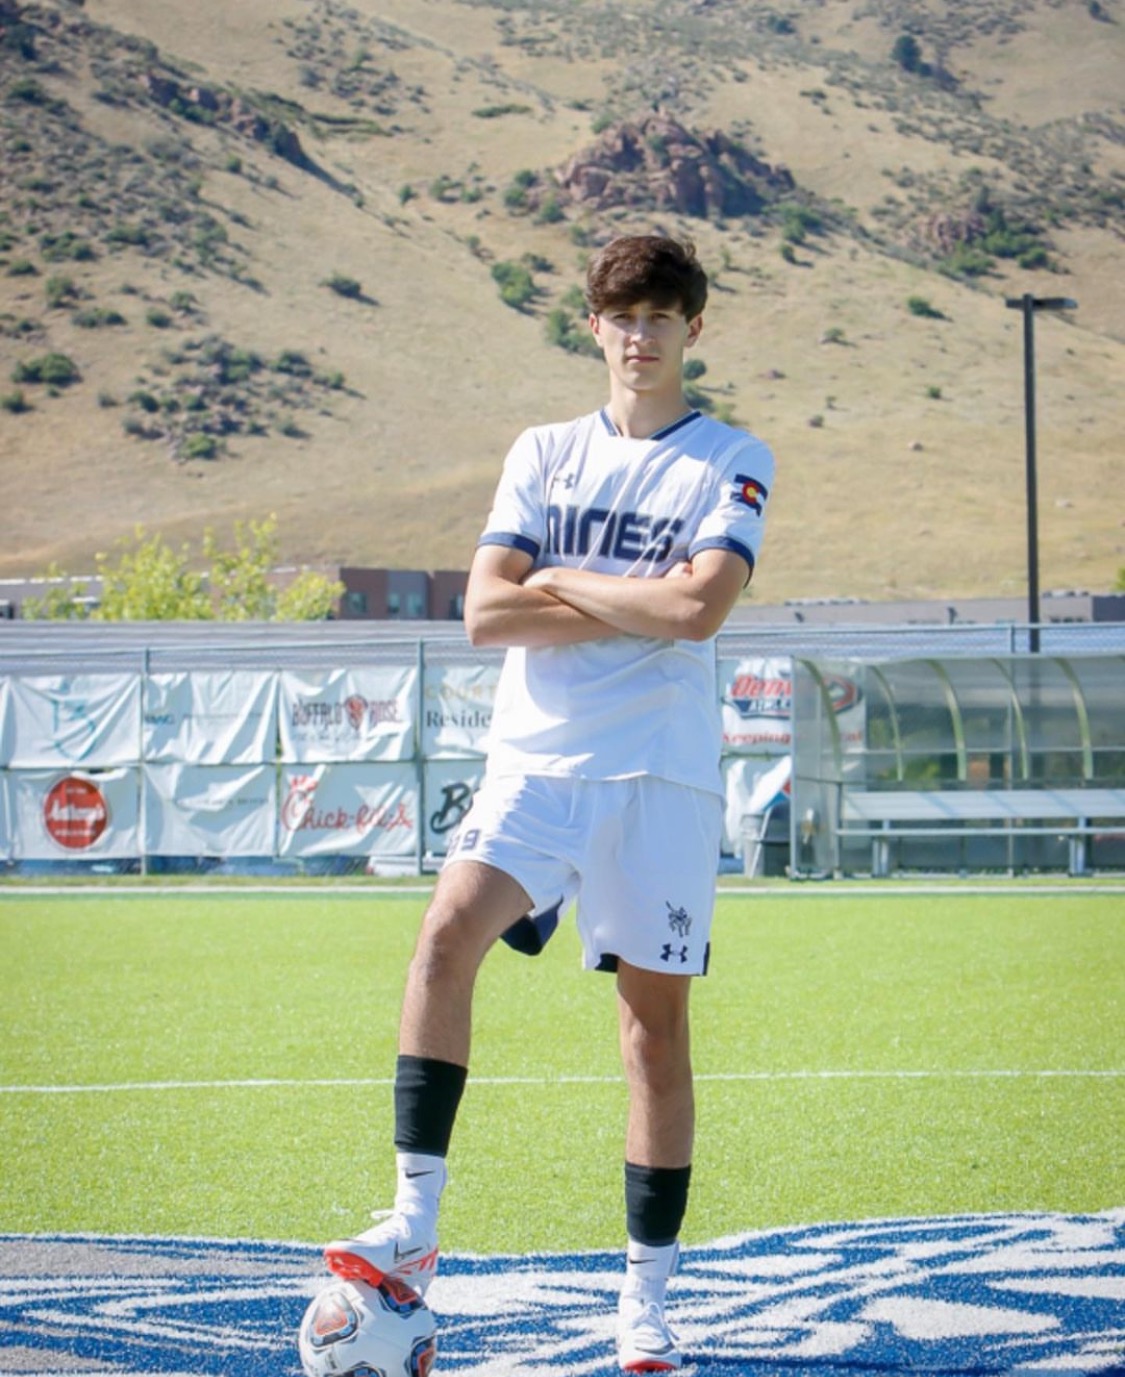 Senior Brady Schienfeld has been a varsity starter all four years, and was named co-captain for his senior season. Schienfeld helped lead the Knights to a Final Four appearance this season, and a state championship appearance last year. (Courtesy of Brady Schienfeld)